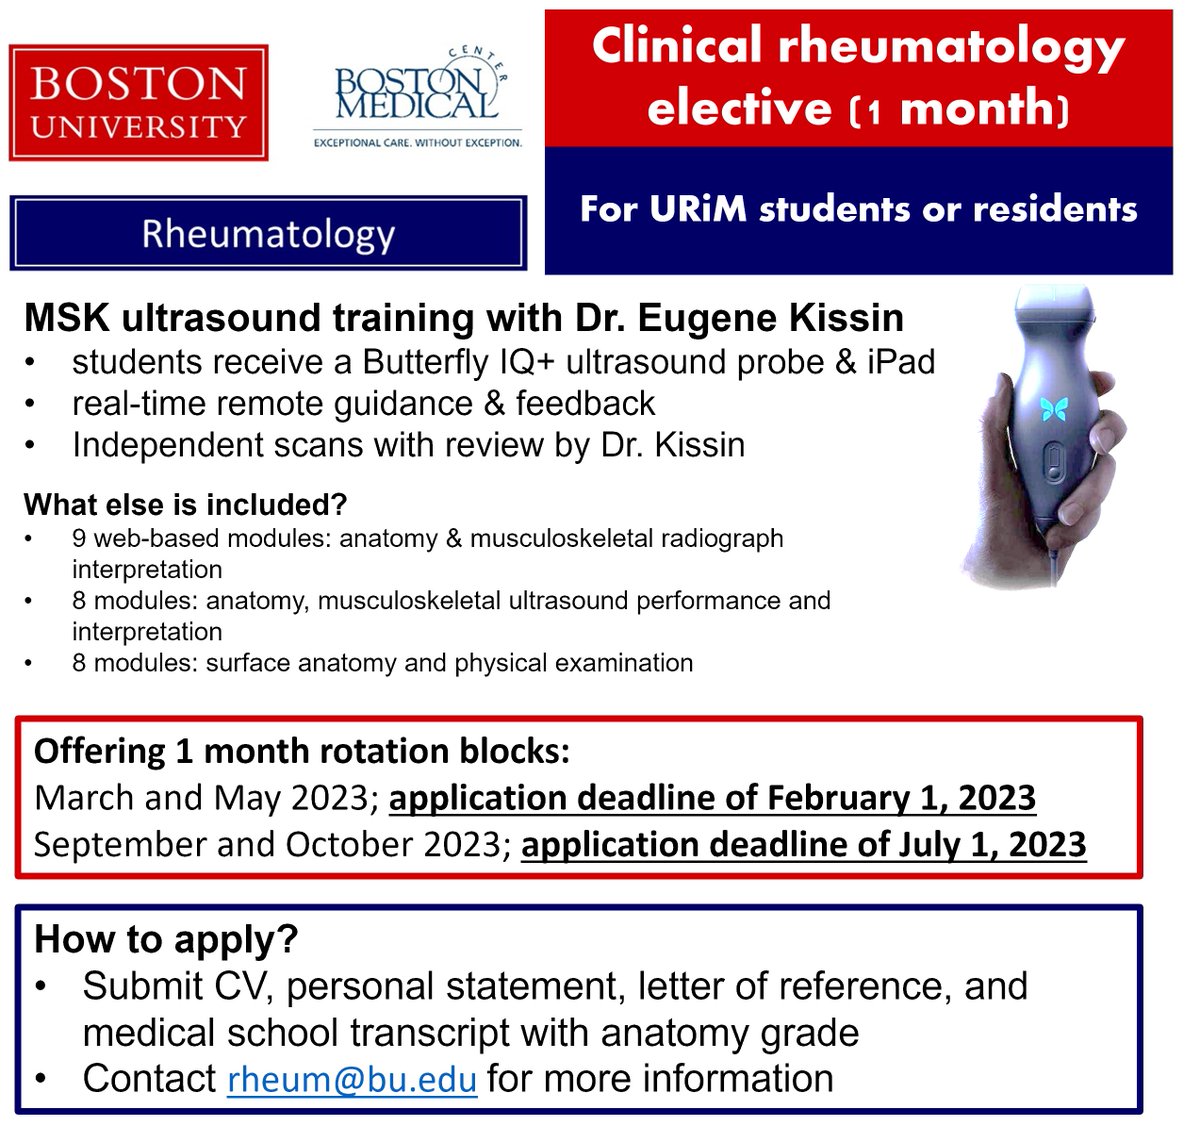 Announcing our 1-month musculoskeletal & imaging clinical rheumatology elective for URiM trainees! 🎚️💻What? MSK ultrasound training with Dr. Kissin with remote guidance & feedback 👩‍💻Who? Medical students & residents who meet the AAMC definition of underrepresented in medicine